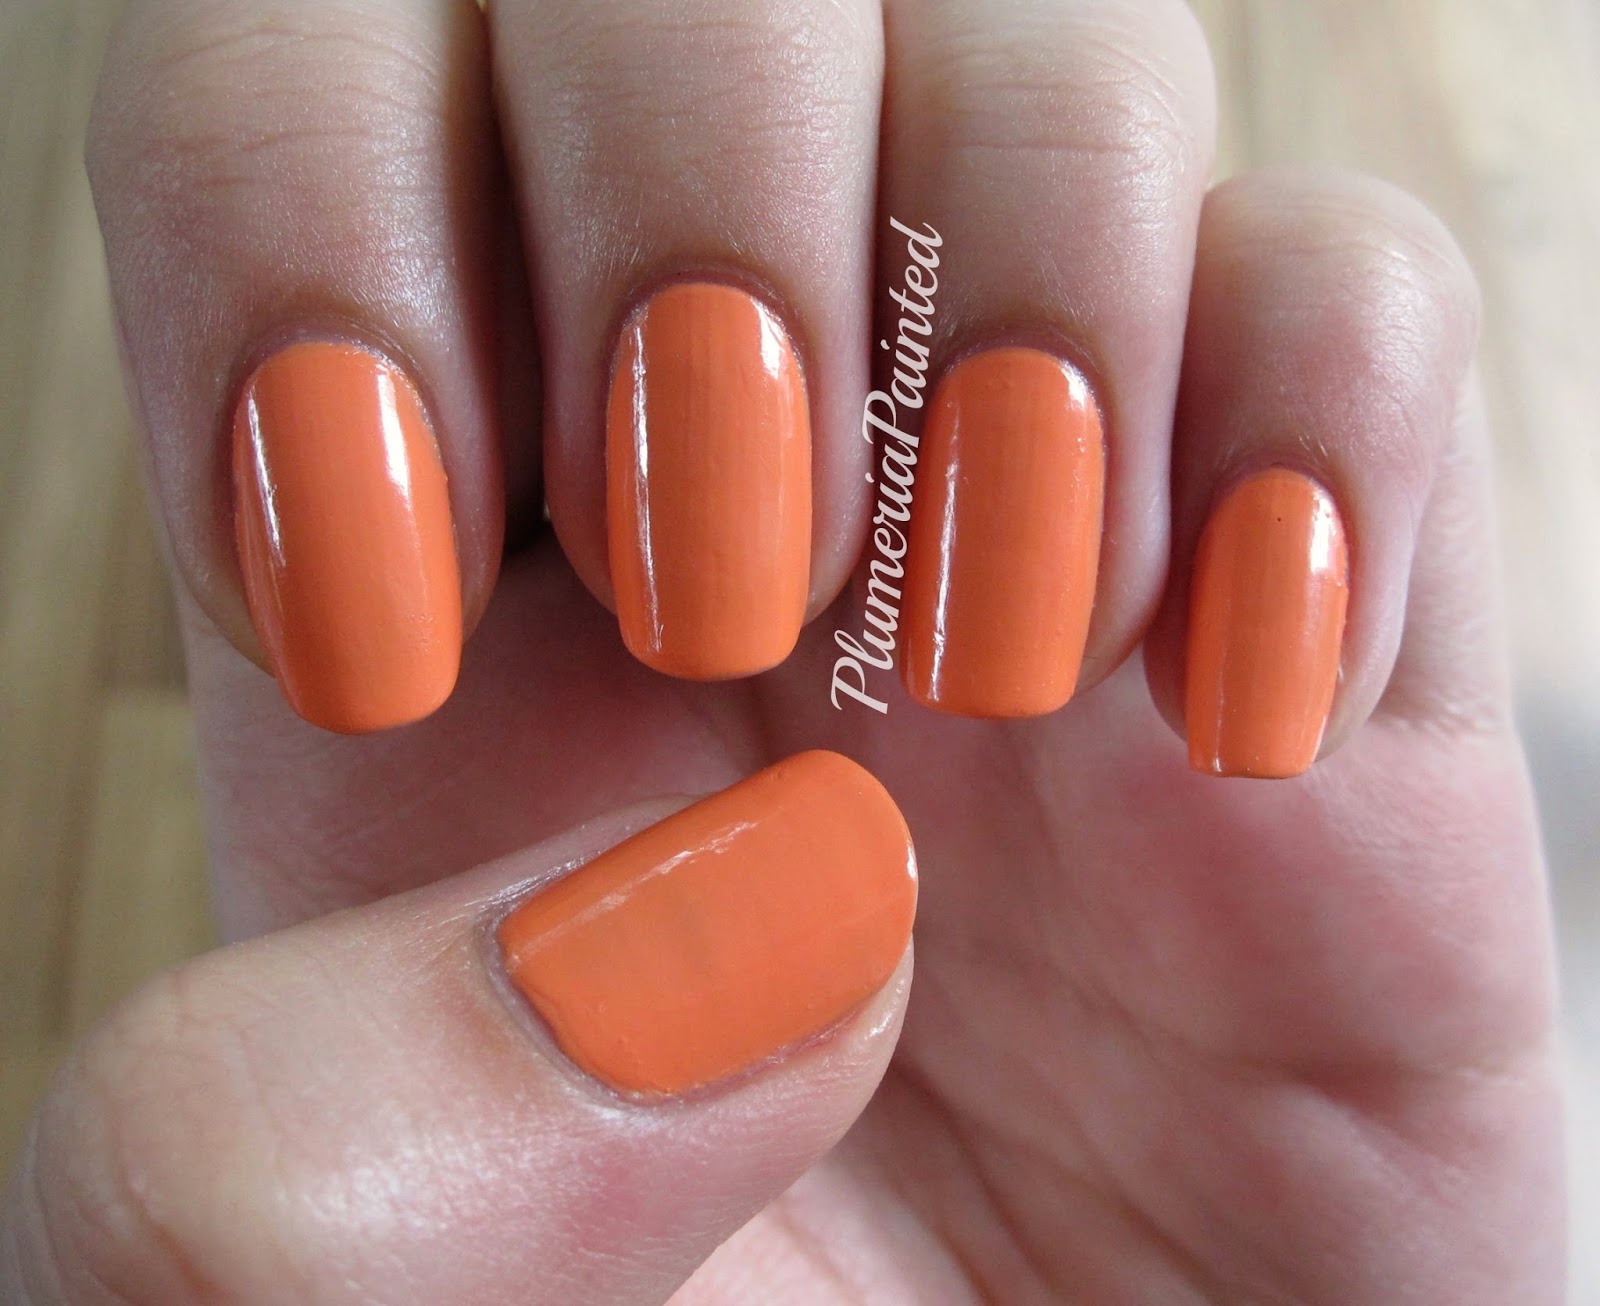 9. OPI Infinite Shine in "Suzi Without a Paddle" - wide 5